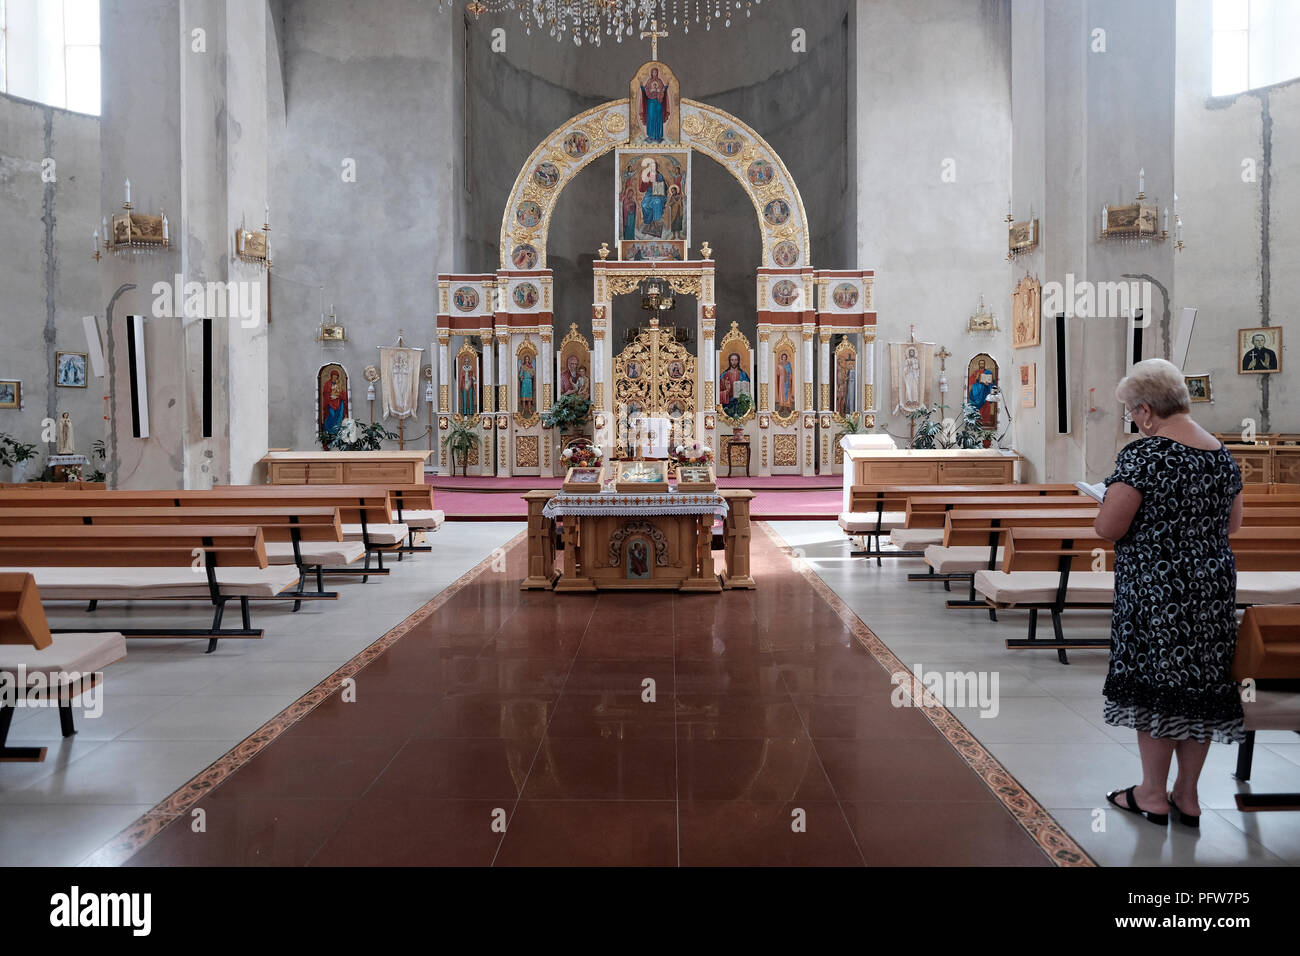 Interior of Cathedral of the Supreme Peter and Paul, established on a former Jewish compound in the city of Chortkiv which was once home to a large Jewish community and was annihilated, brutally, by the Germans during the Second World War in Ternopil Oblast (province) in western Ukraine. Stock Photo